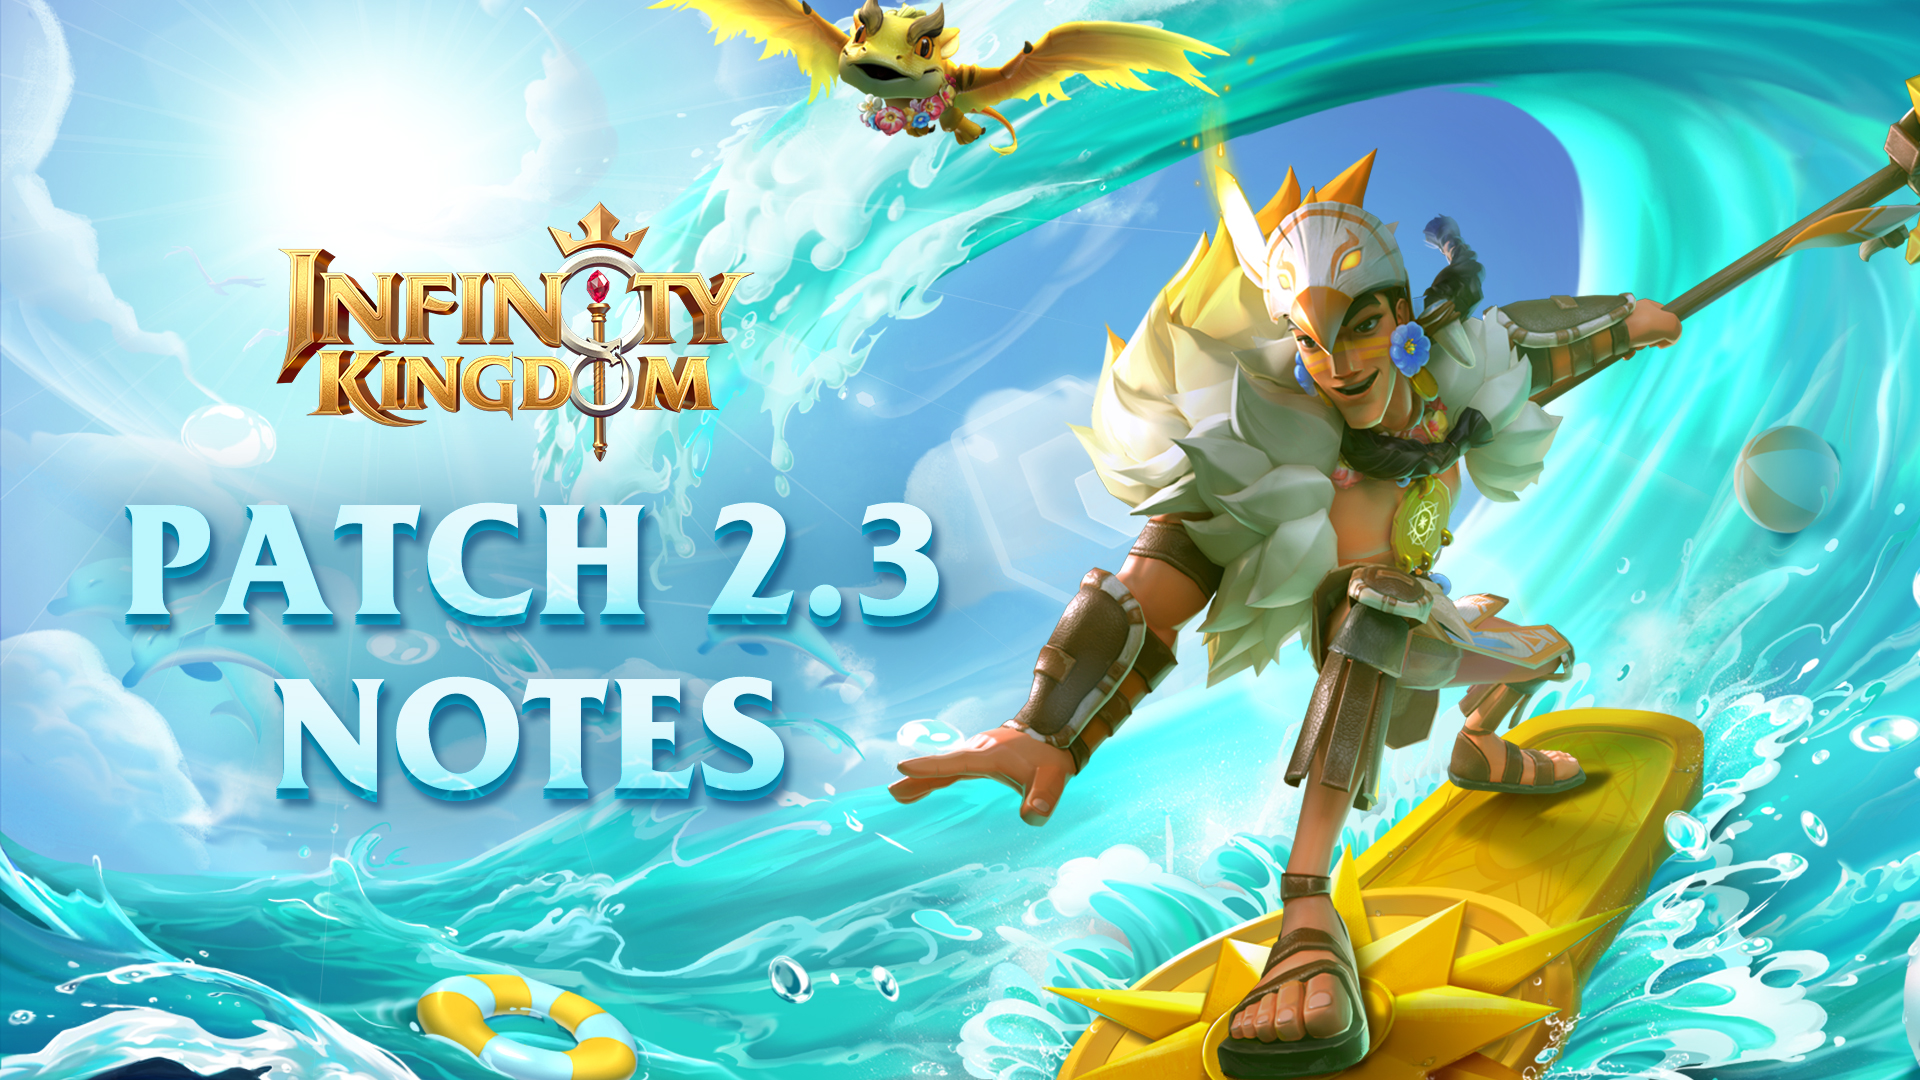 Patch 2.3 Notes